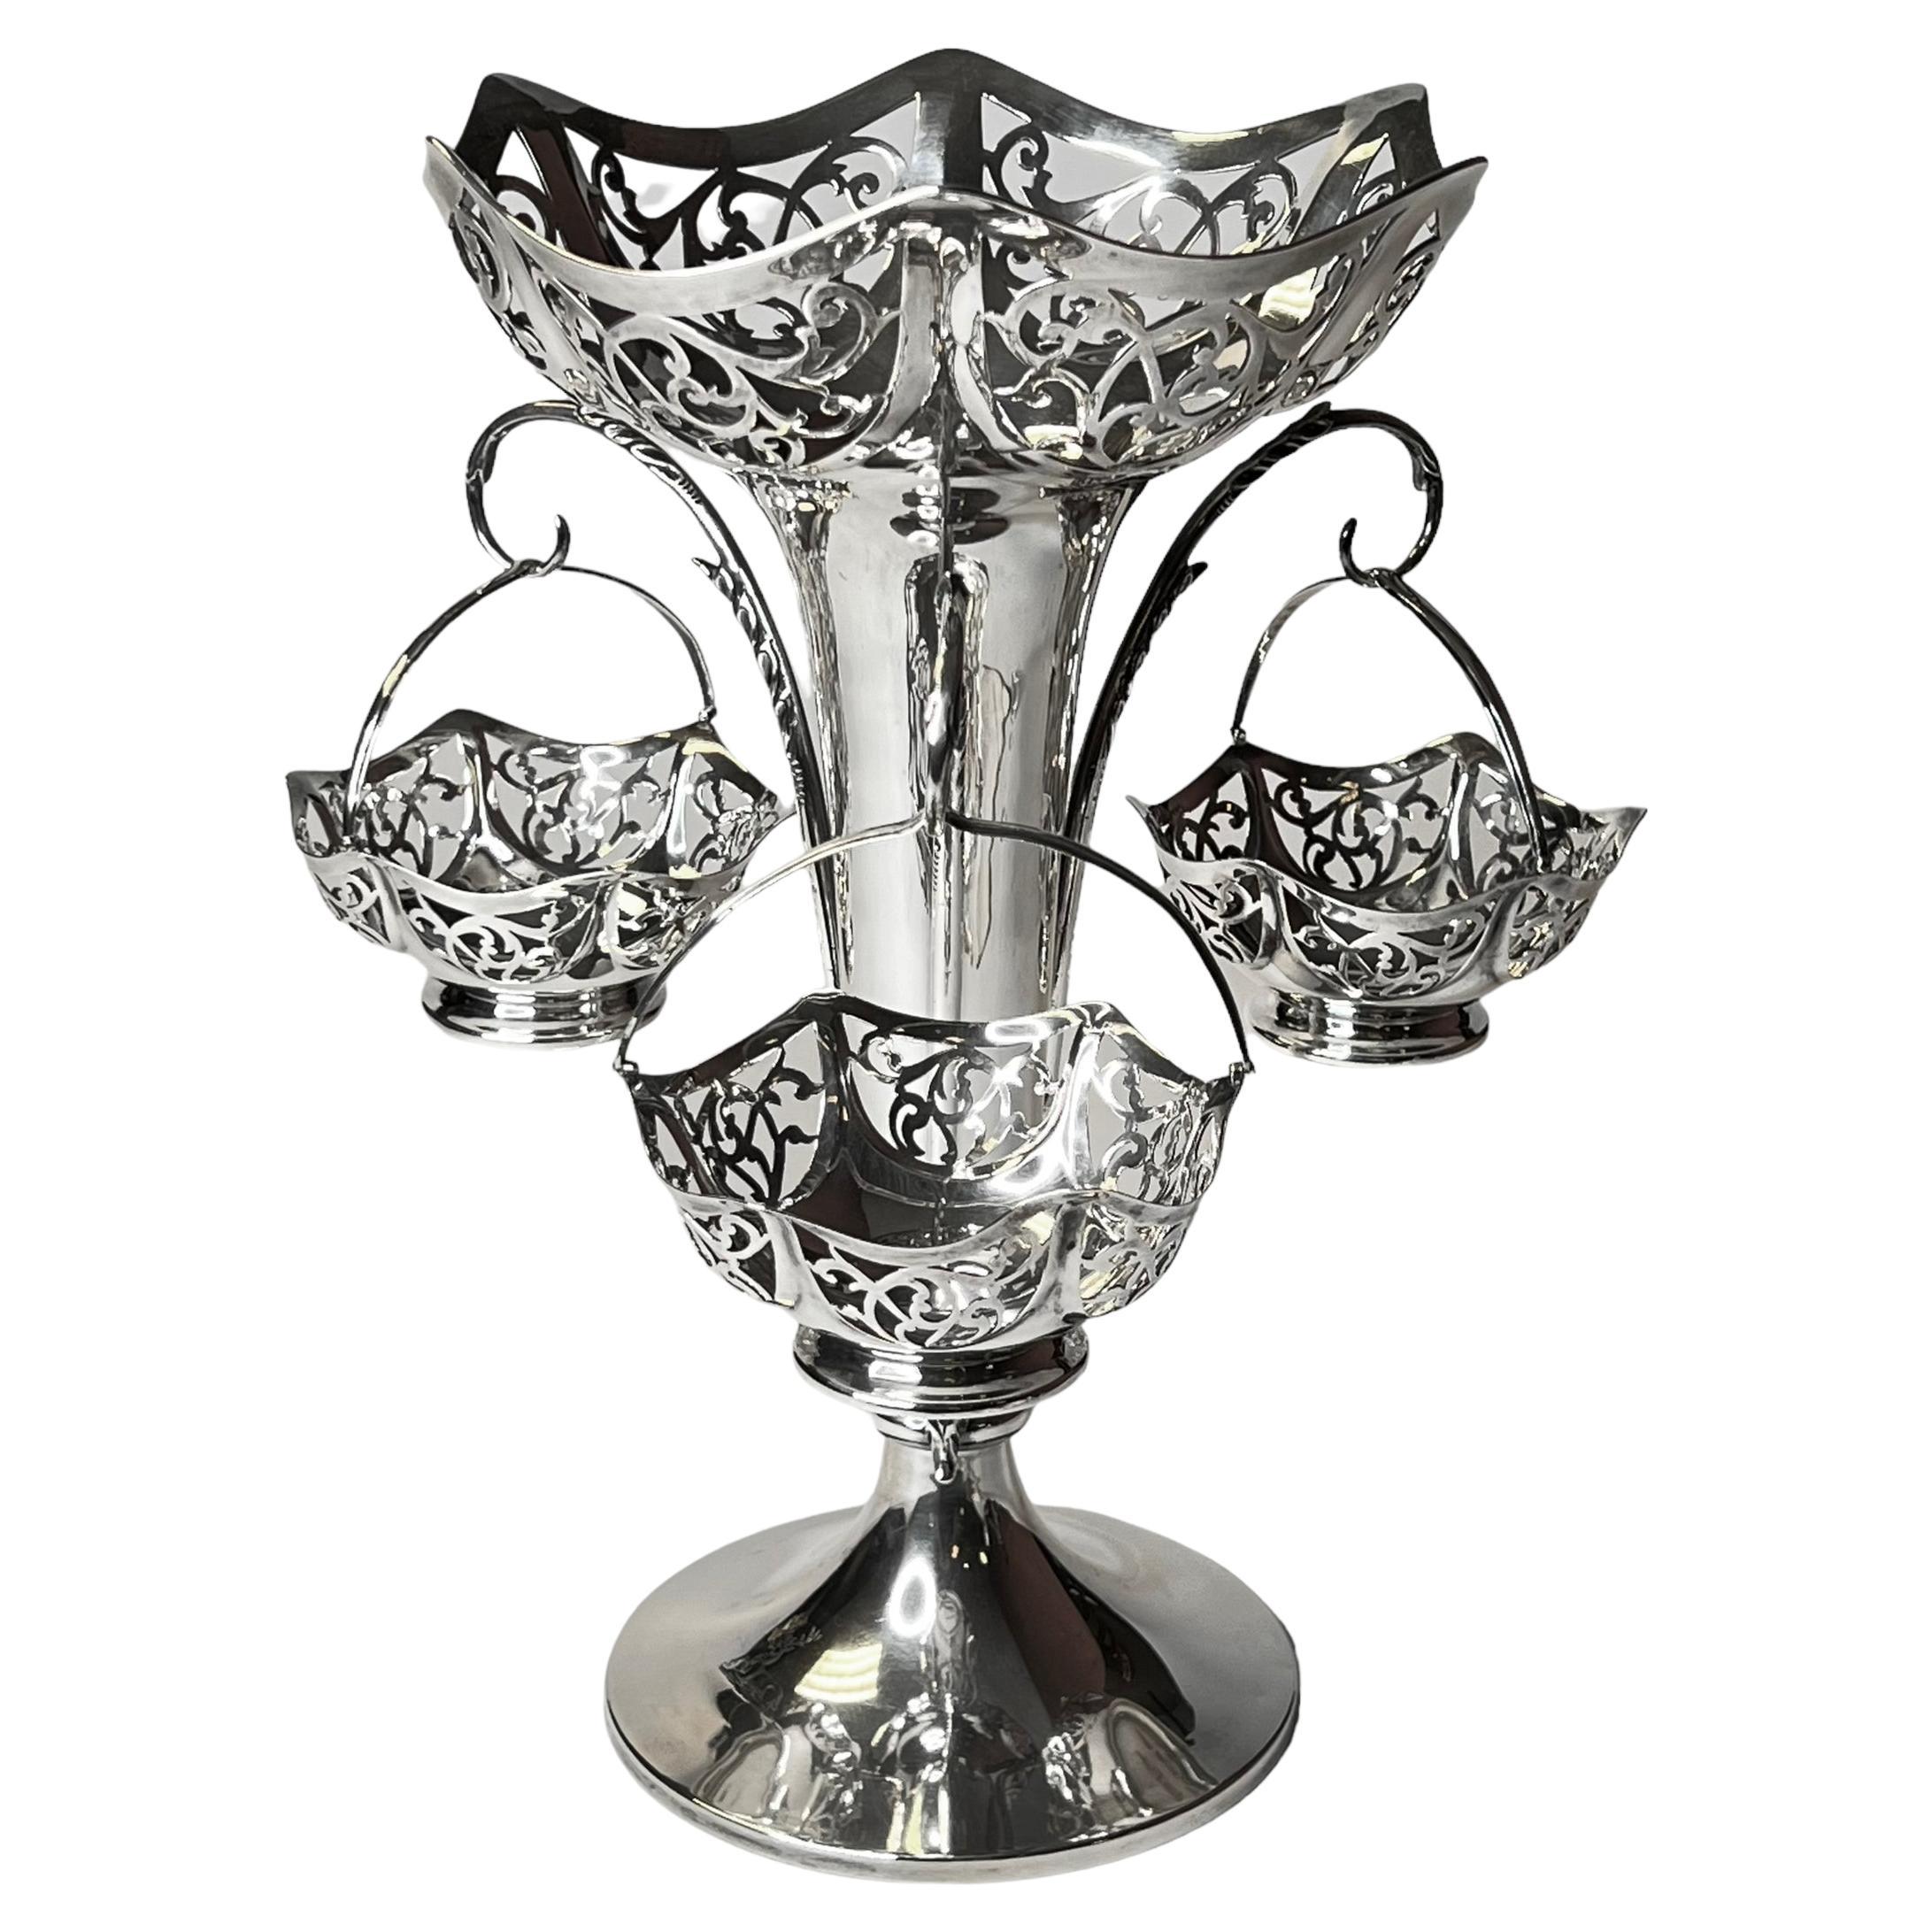 Epergne anglaise en argent sterling - Goldsmiths & Silversmiths Co - 1893